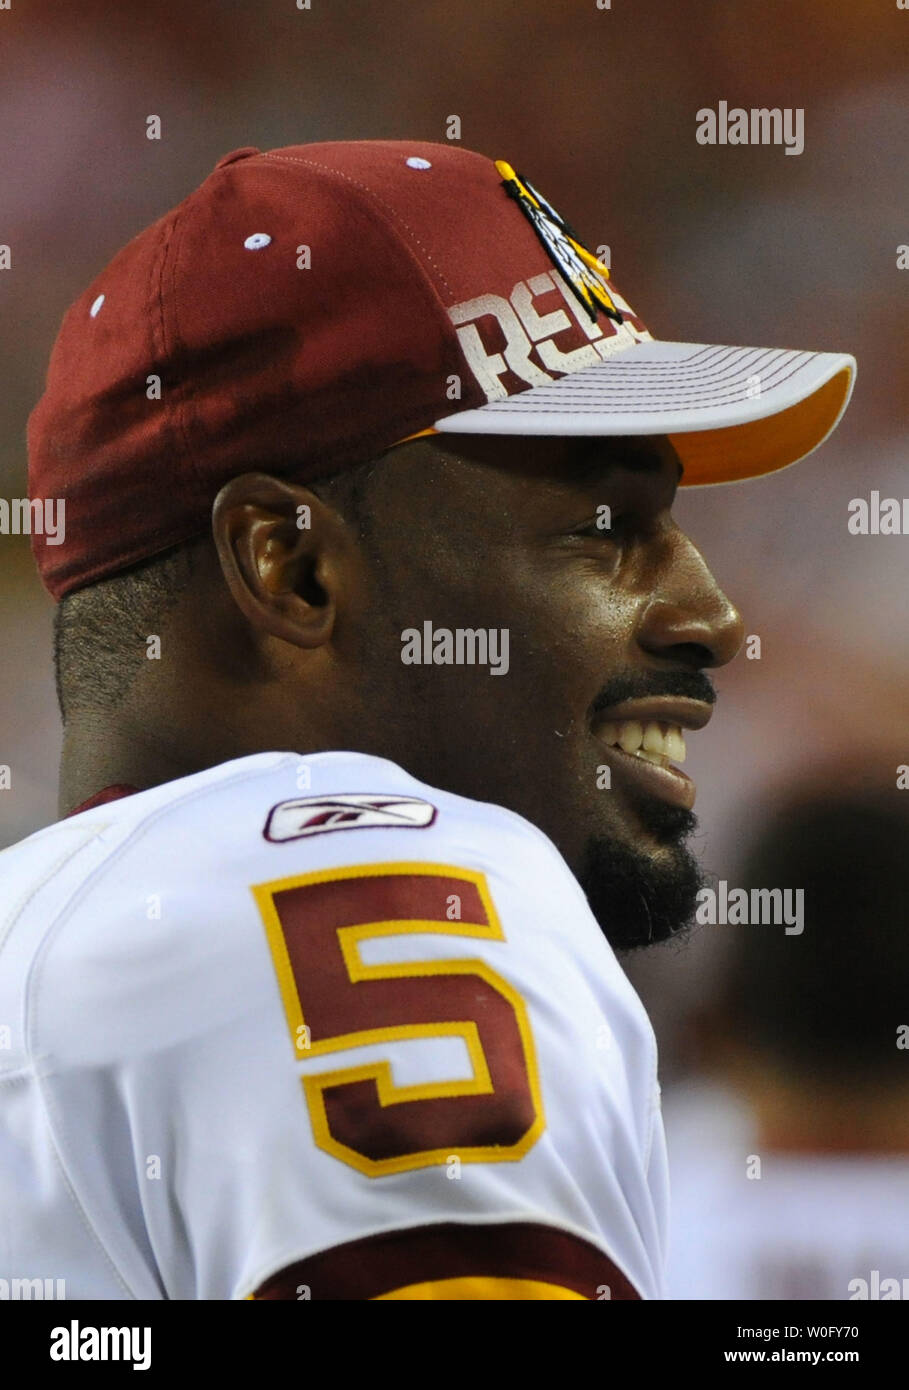 Washington Redskins' quarterback Donovan McNabb is seen on the sidelines as the Redskins play a pre-season game against the Buffalo Bills at FedEx Field in Washington on August 13, 2010.   UPI/Kevin Dietsch Stock Photo